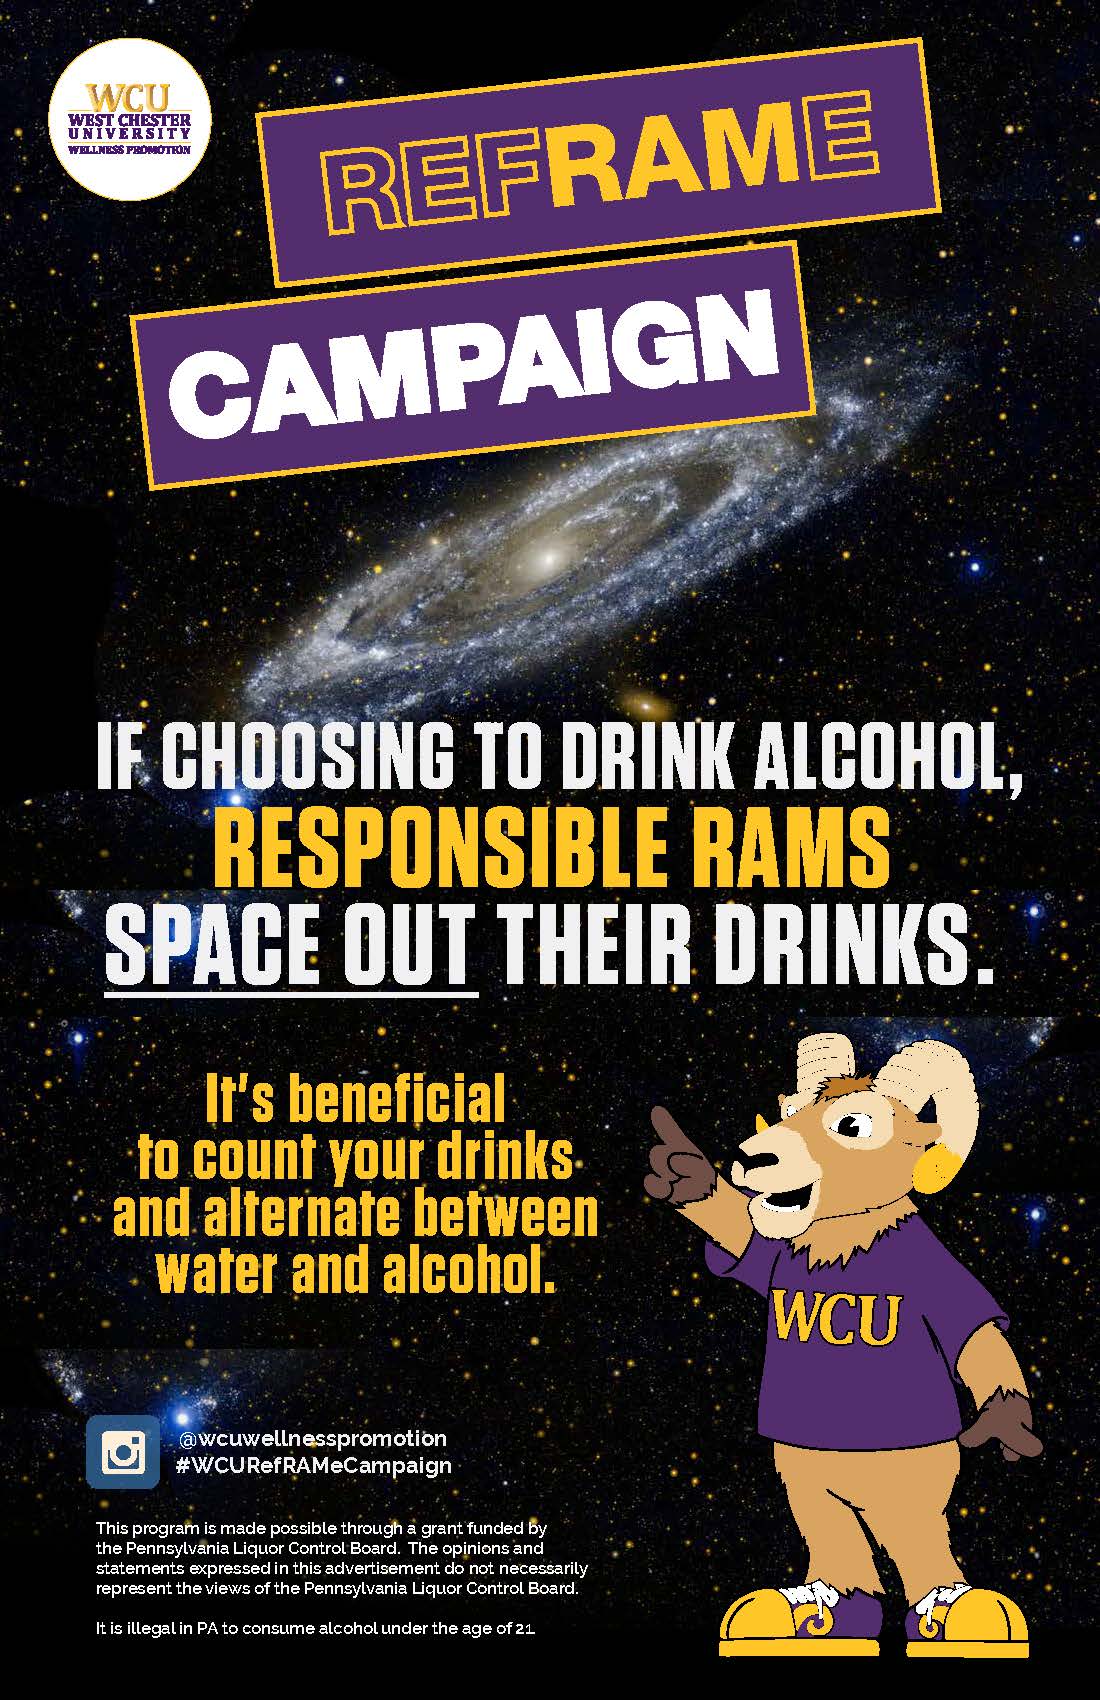 If choosing to drink alcohol, responsible rams space out their drinks. It's beneficial to count your drinks and alternate between water and alcohol.